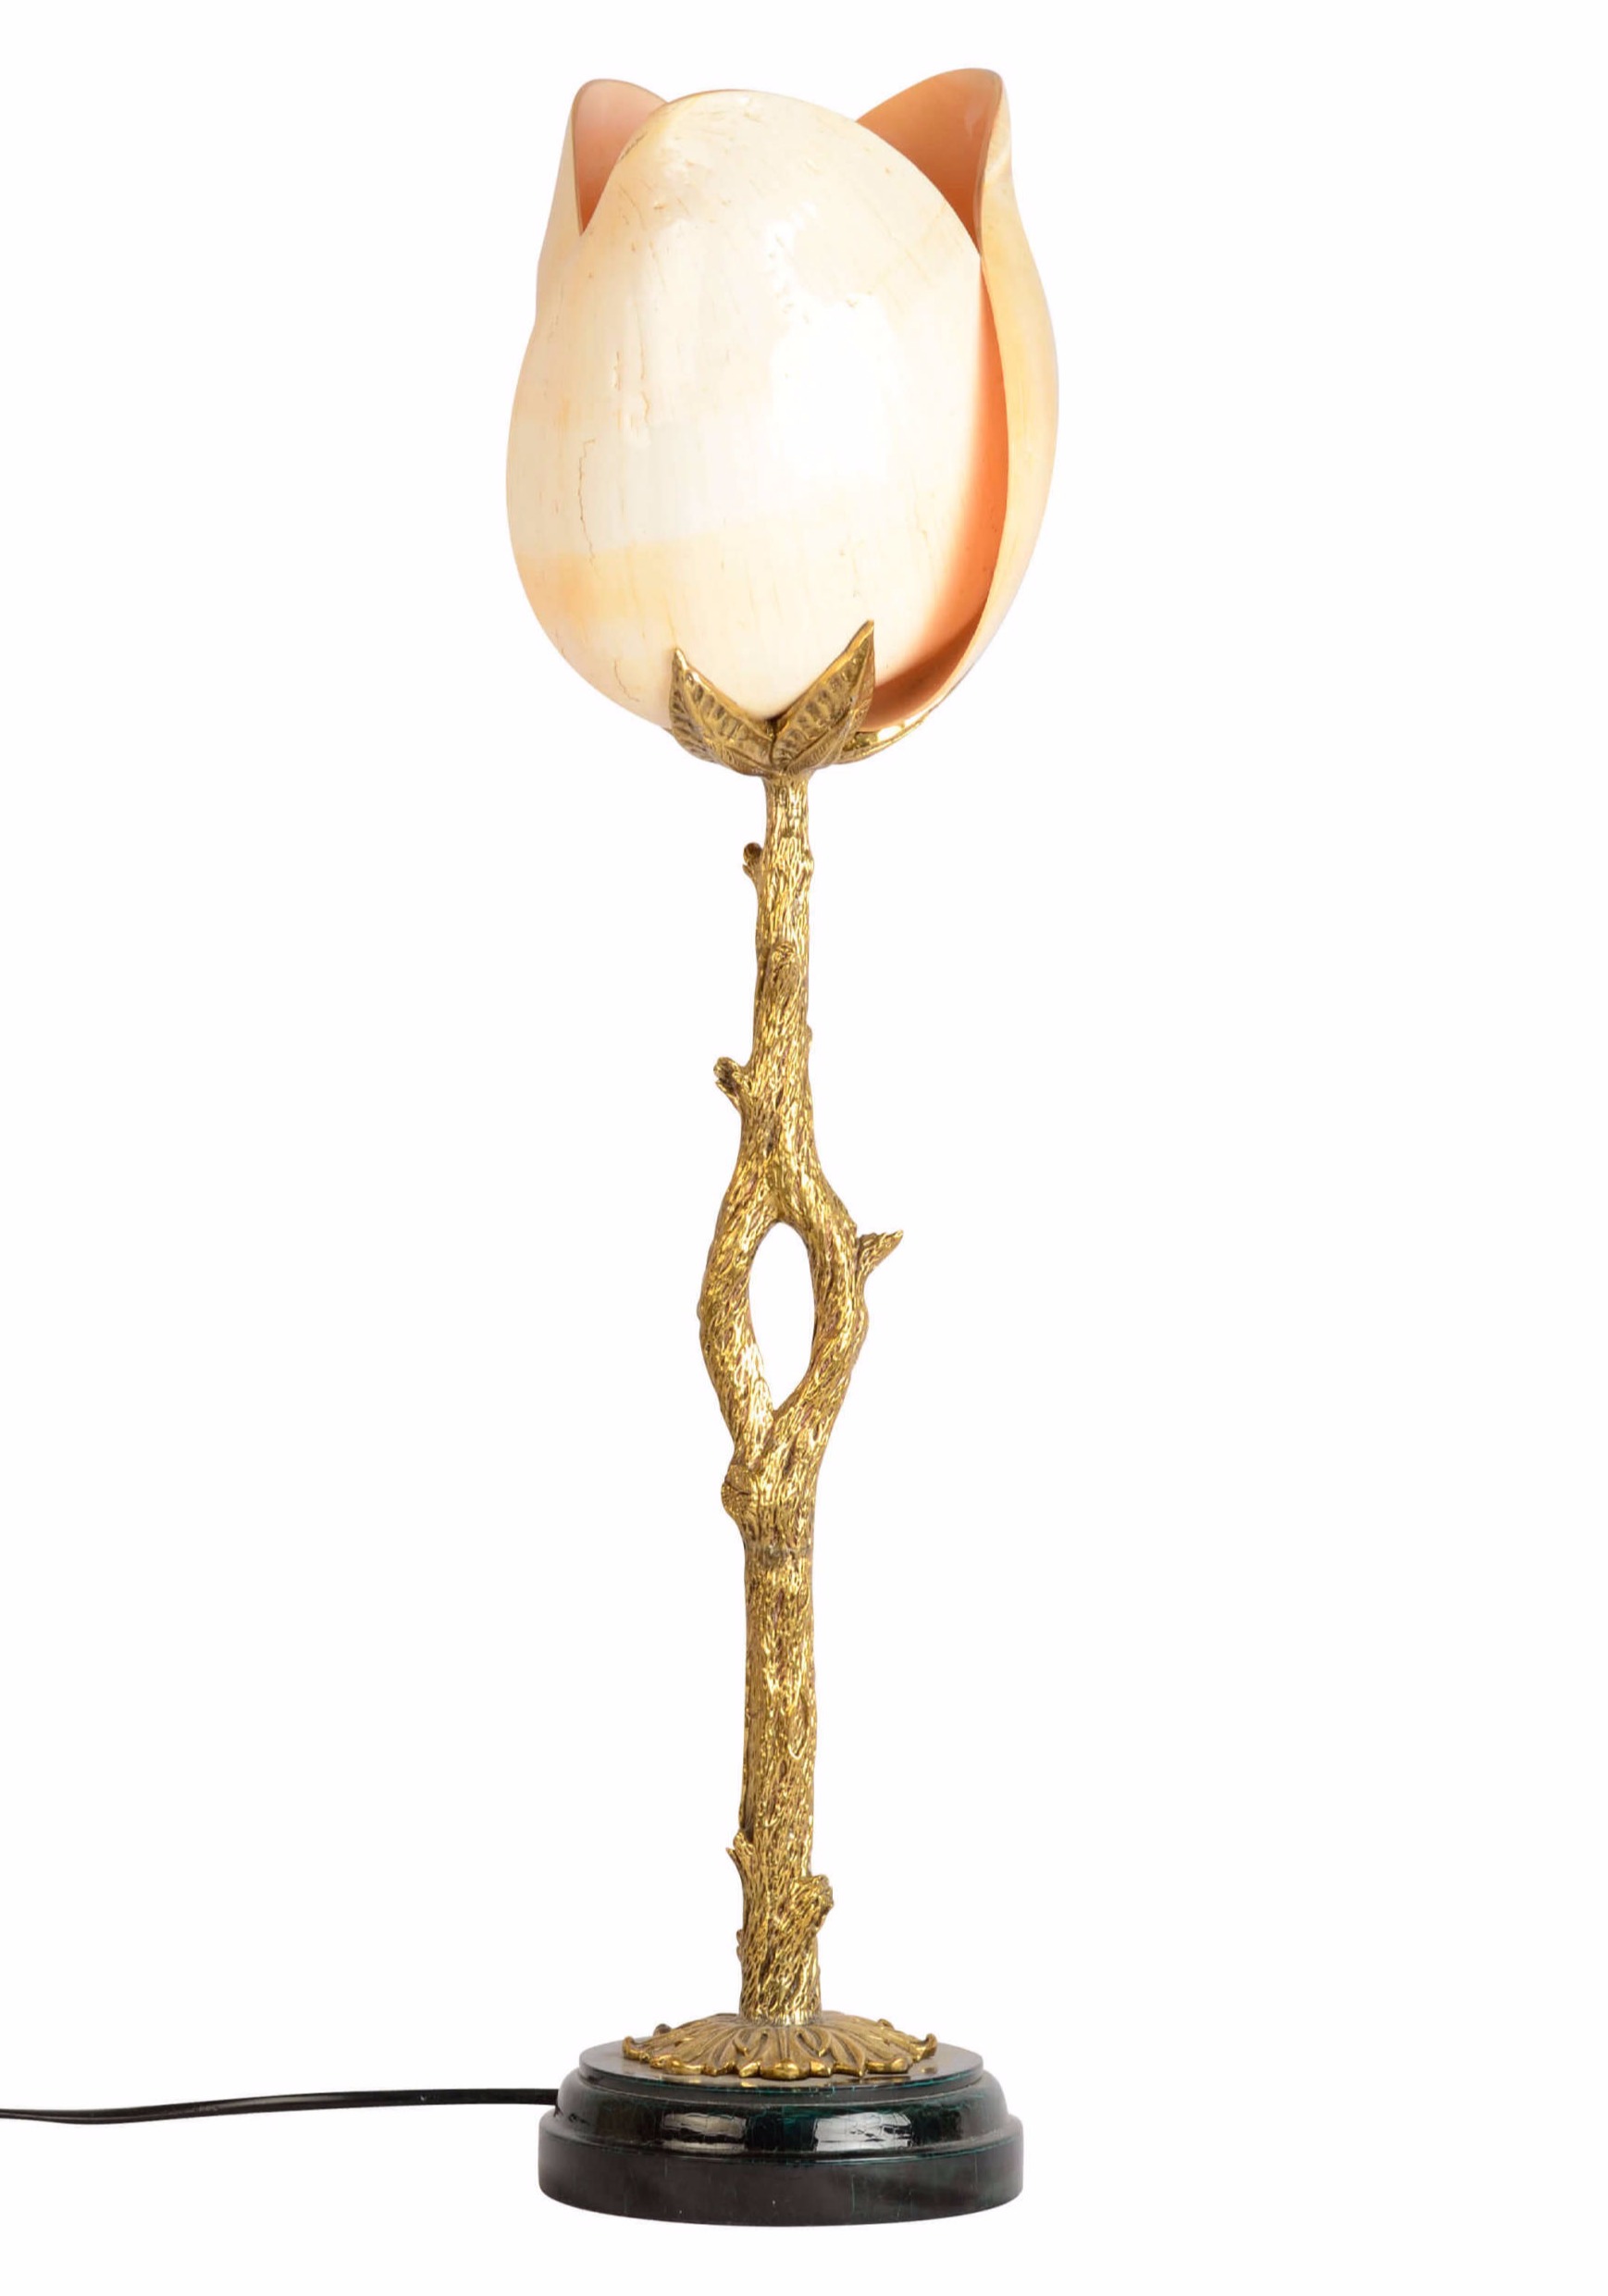 Melo Shell Flower on Casted Brass Tree branch Stand, Crack Green Pen Shell Base